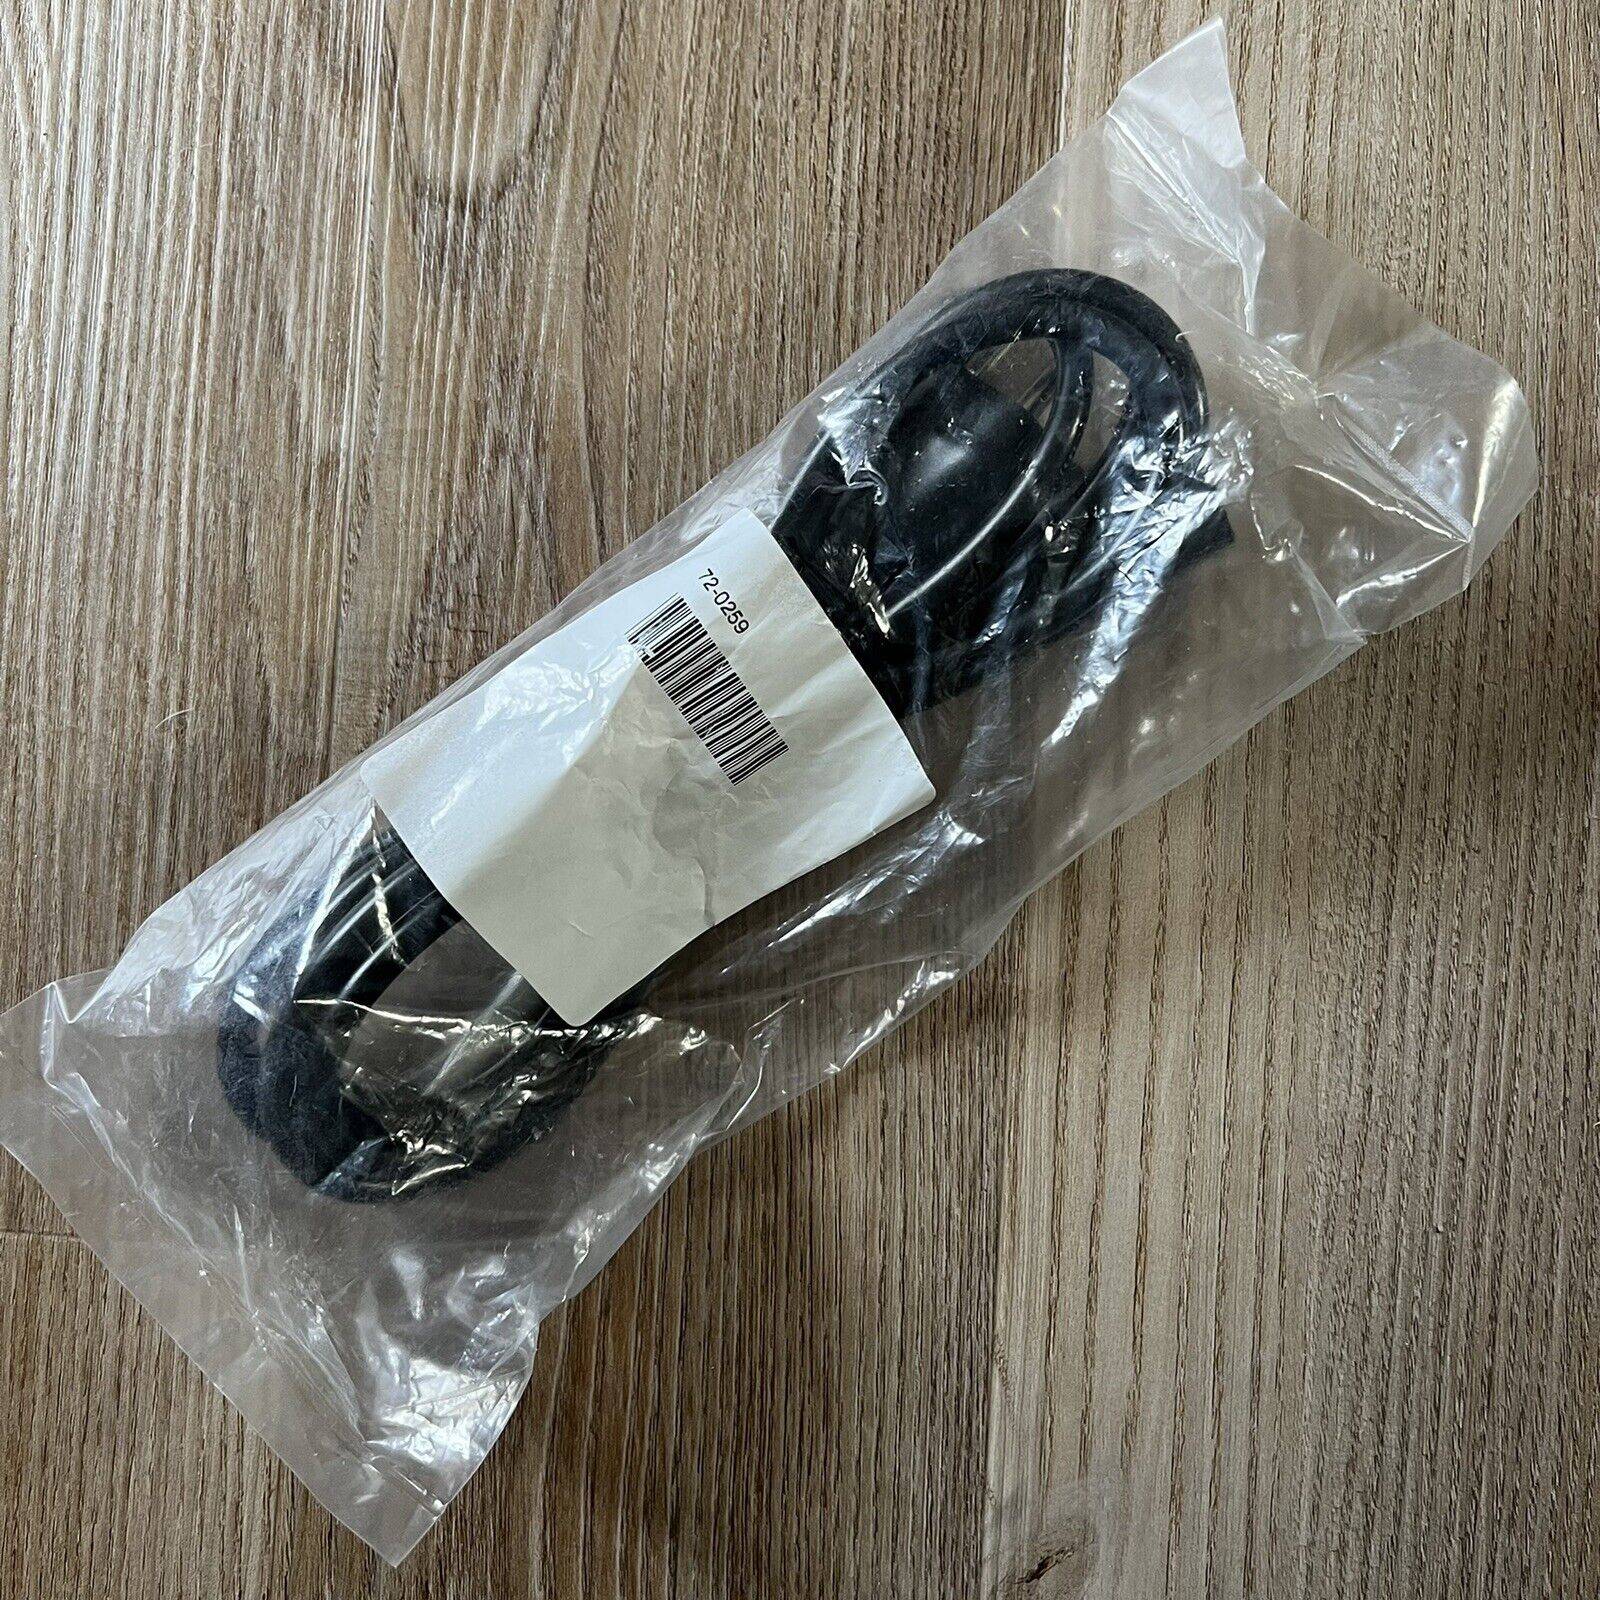 CISCO 72-0259 10A 125V Black AC Power Cable 6 Foot 3 Prong New In Package